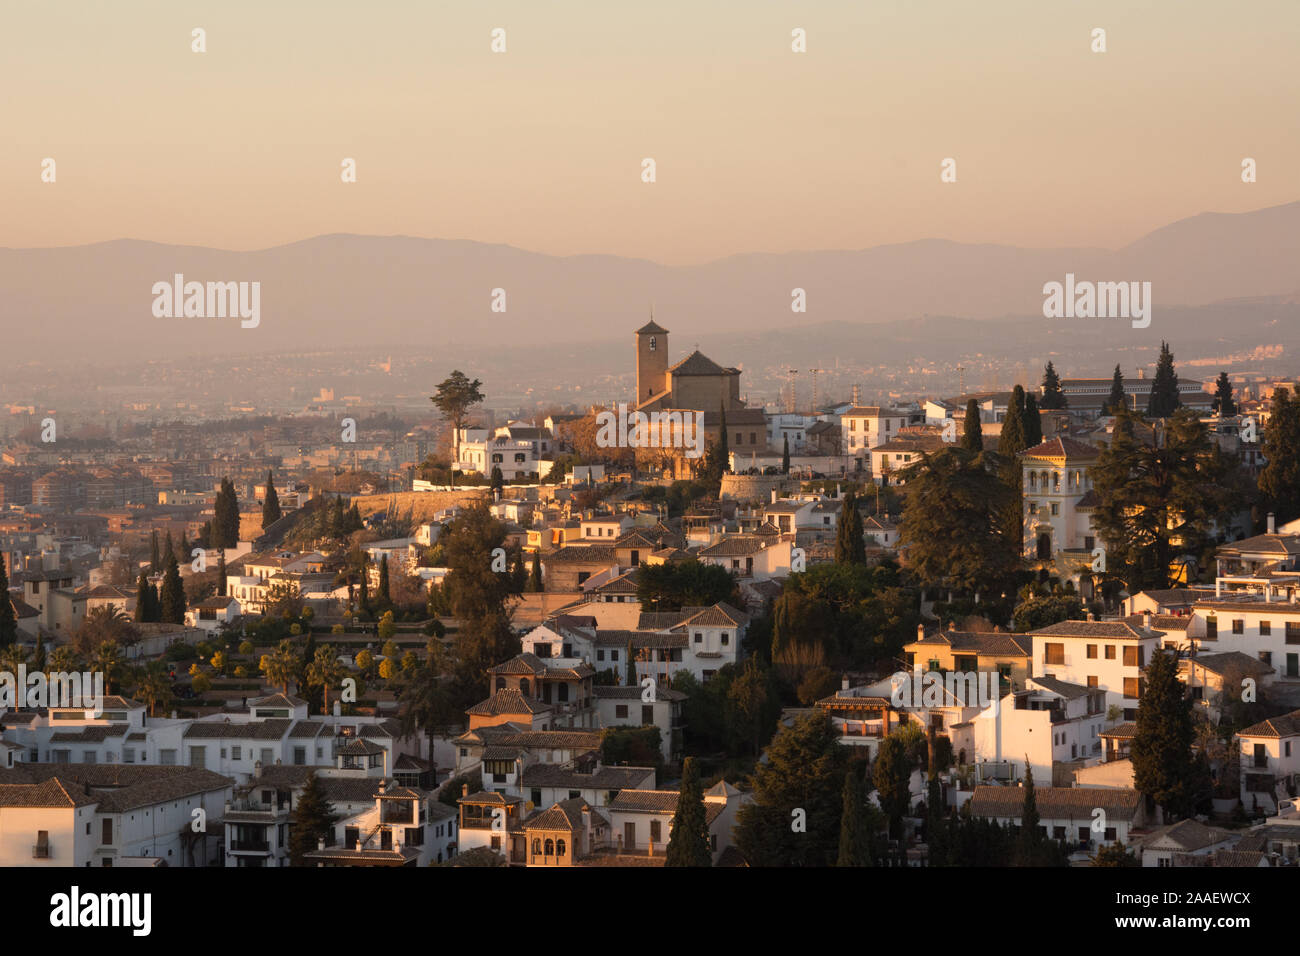 A view of the city of Granada from the Alhambra palace complex, Andalusia, Spain on a beautiful hazy winter's day Stock Photo